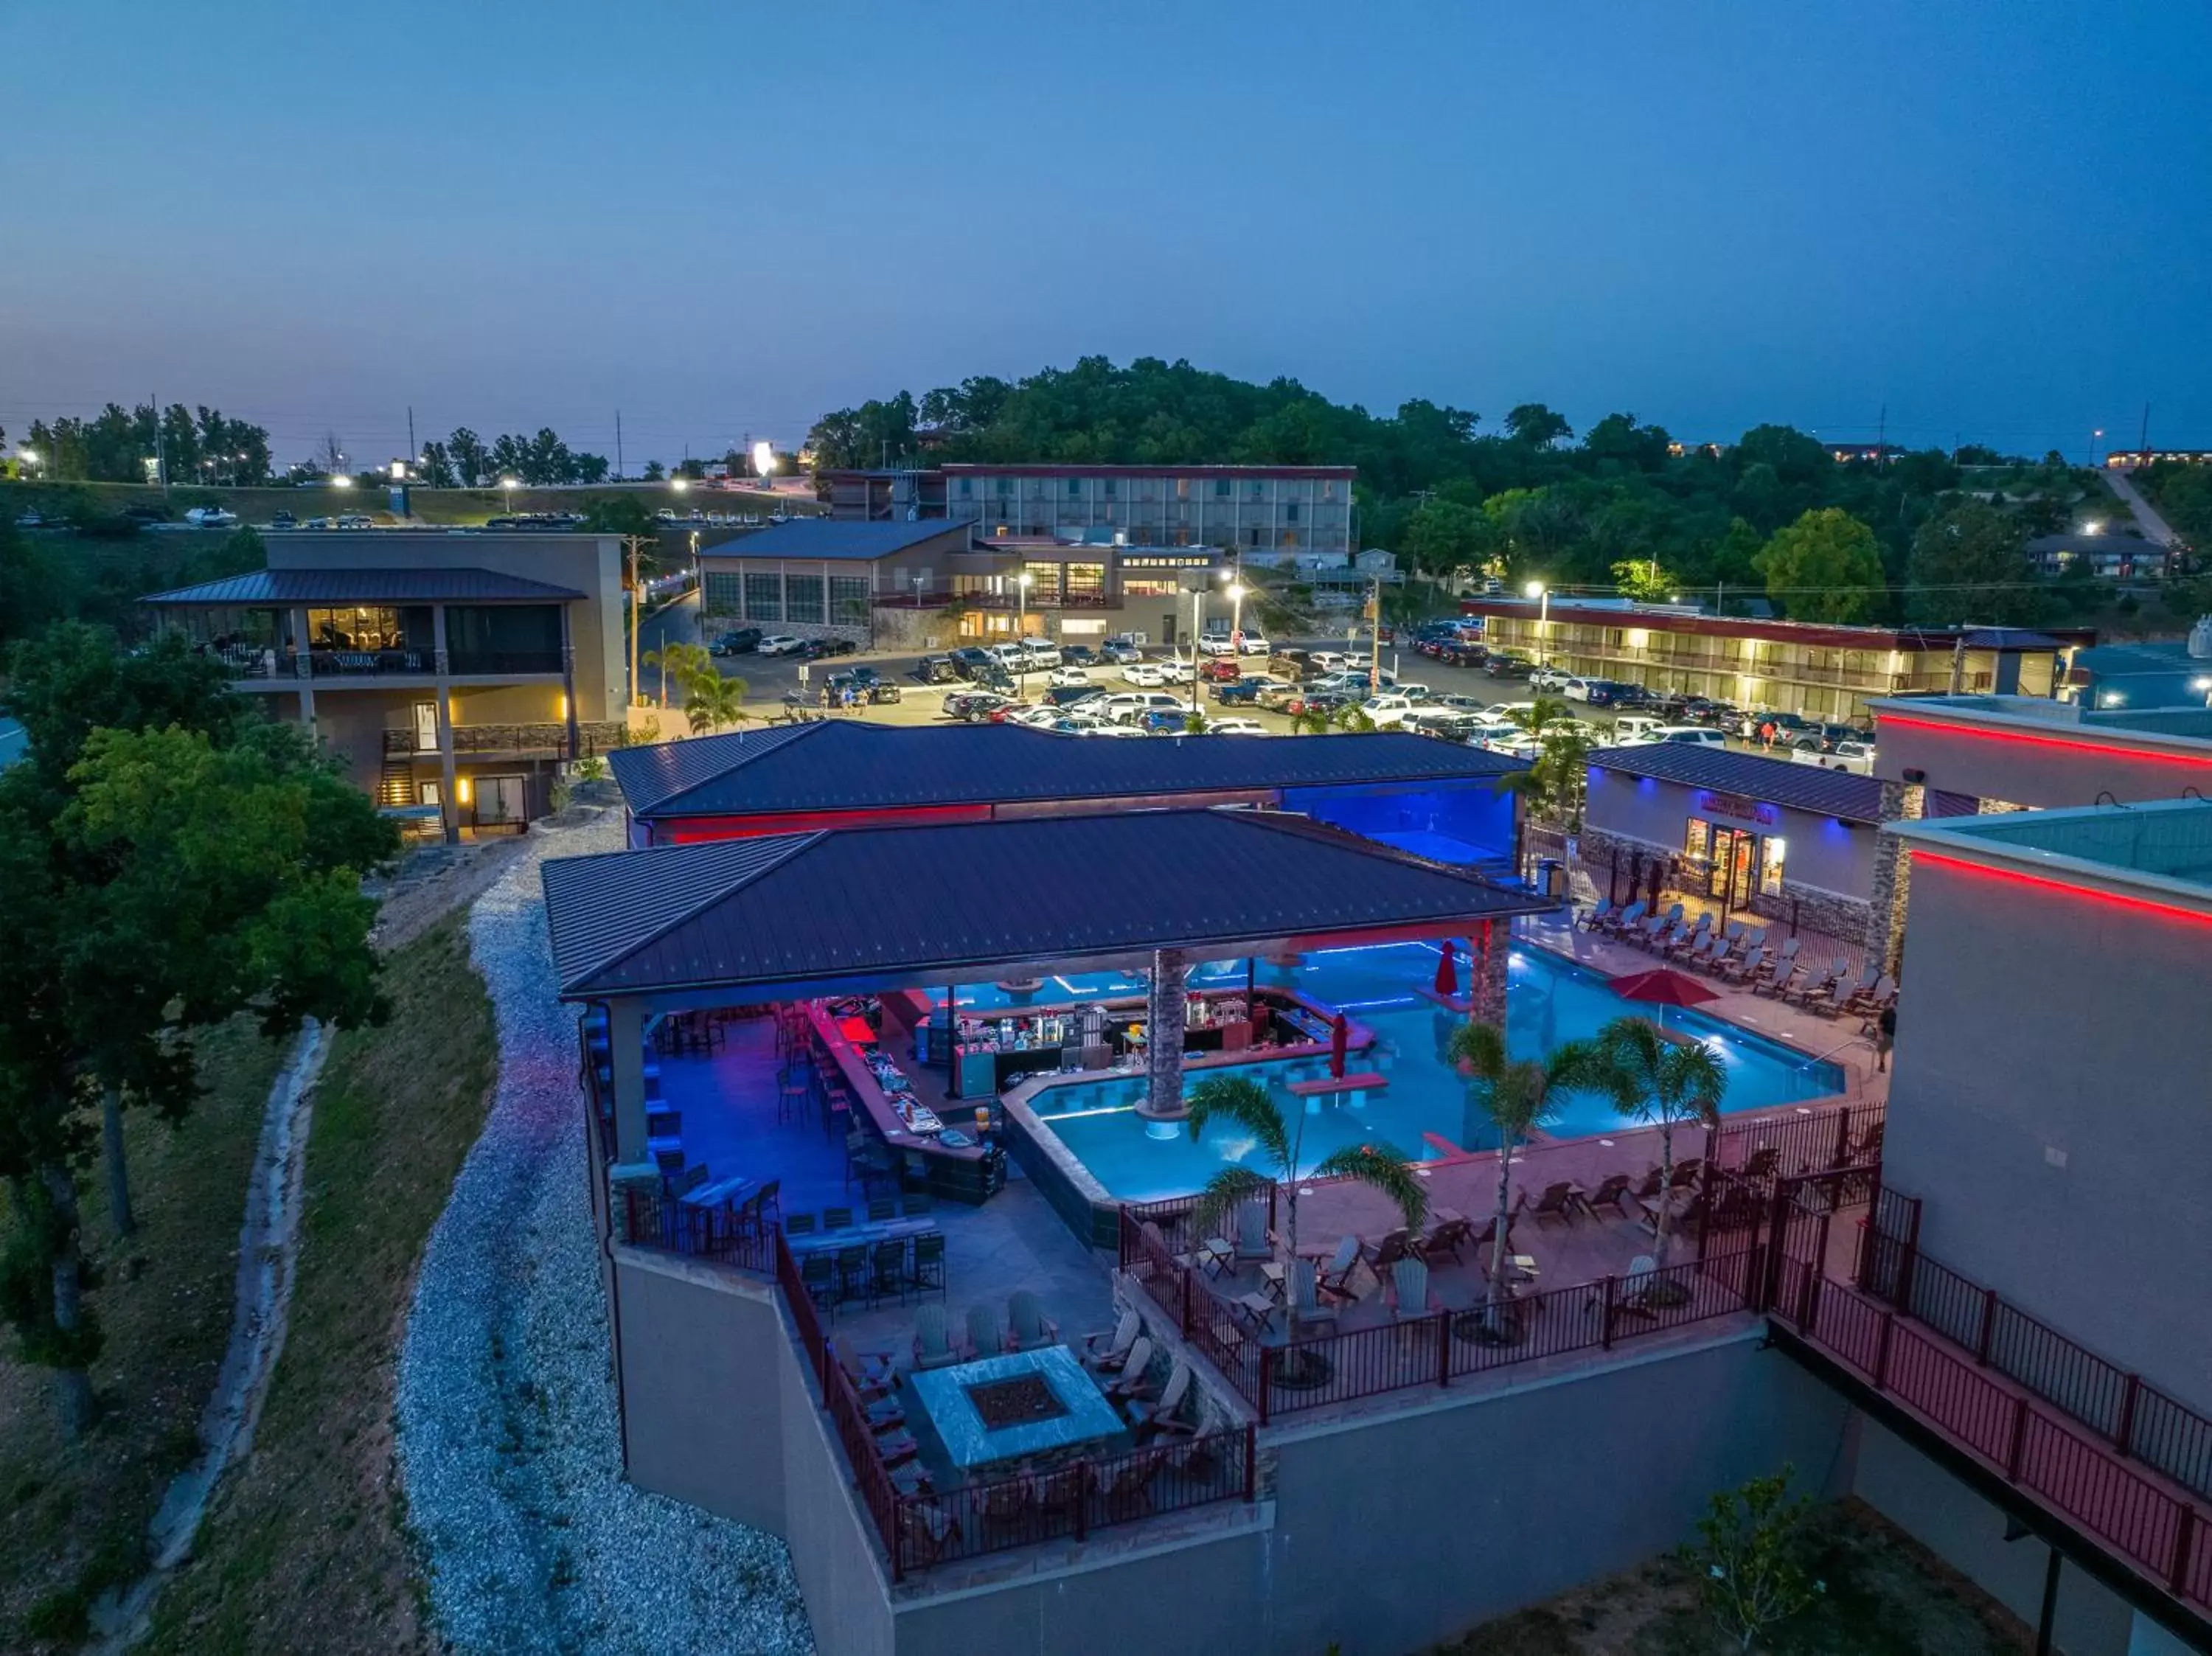 Property building, Pool View in The Resort at Lake of the Ozarks